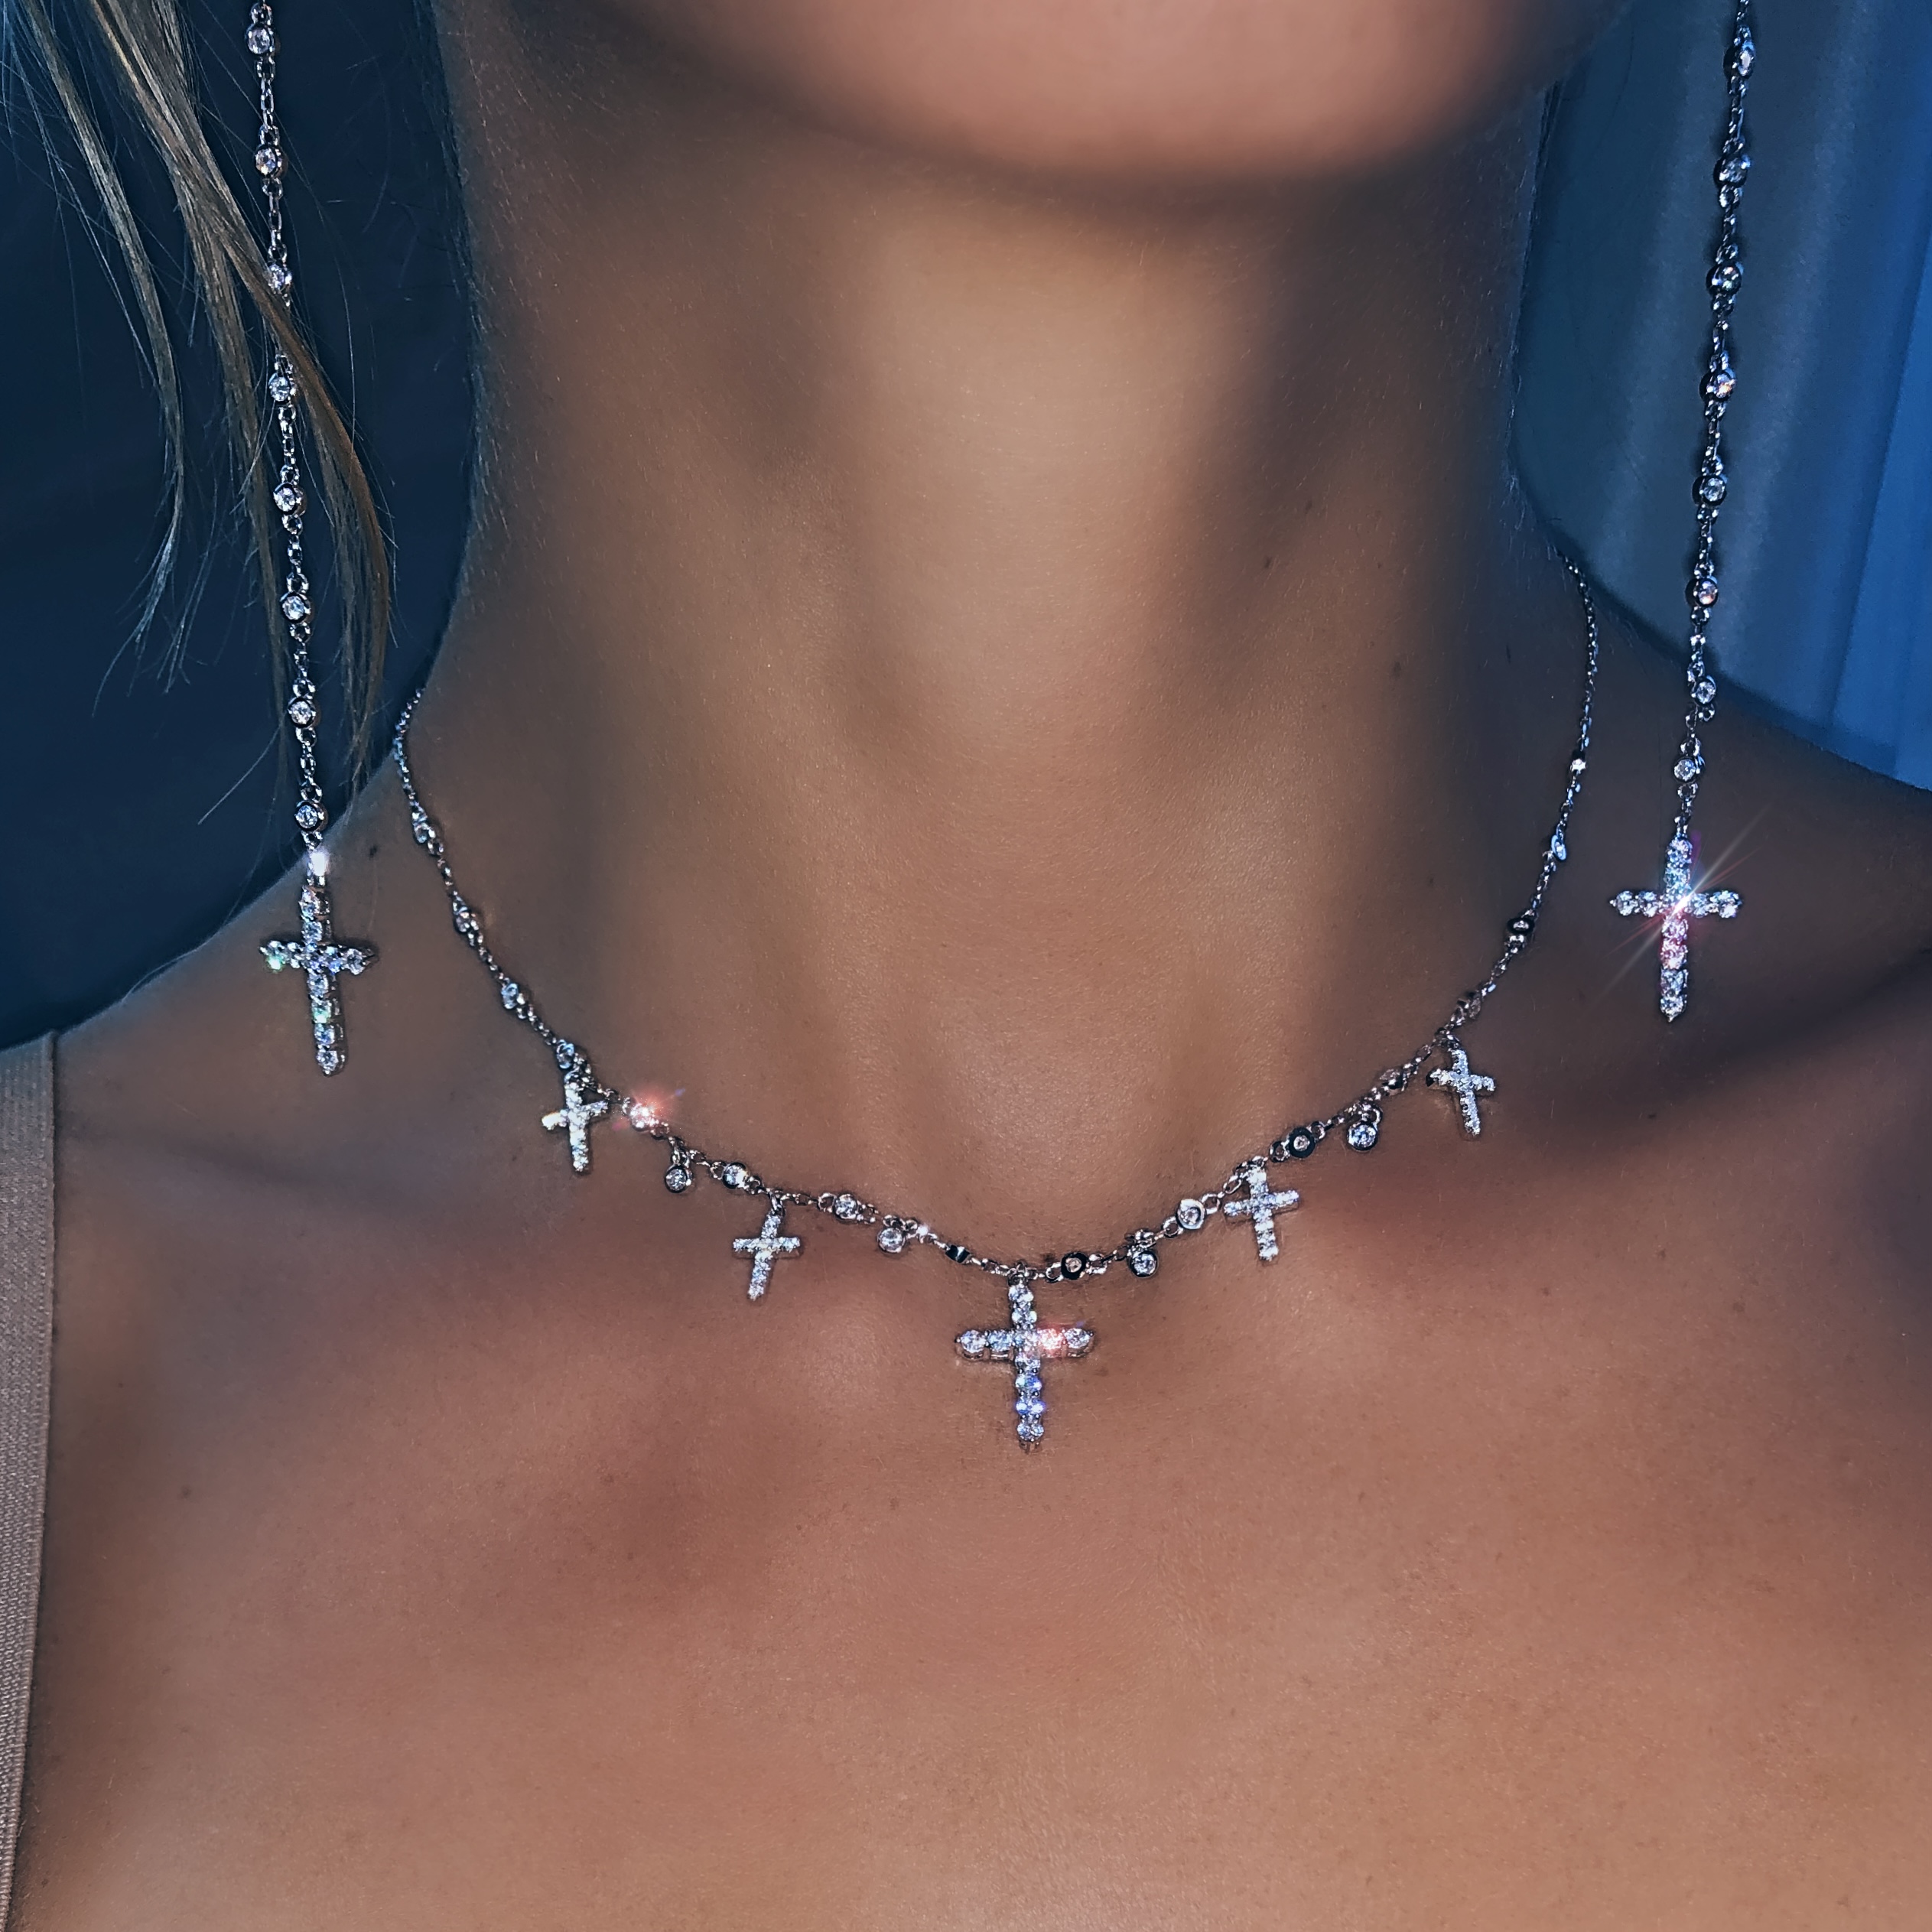 Necklace 5 Crosses silver 925 KOJEWELRY 62400